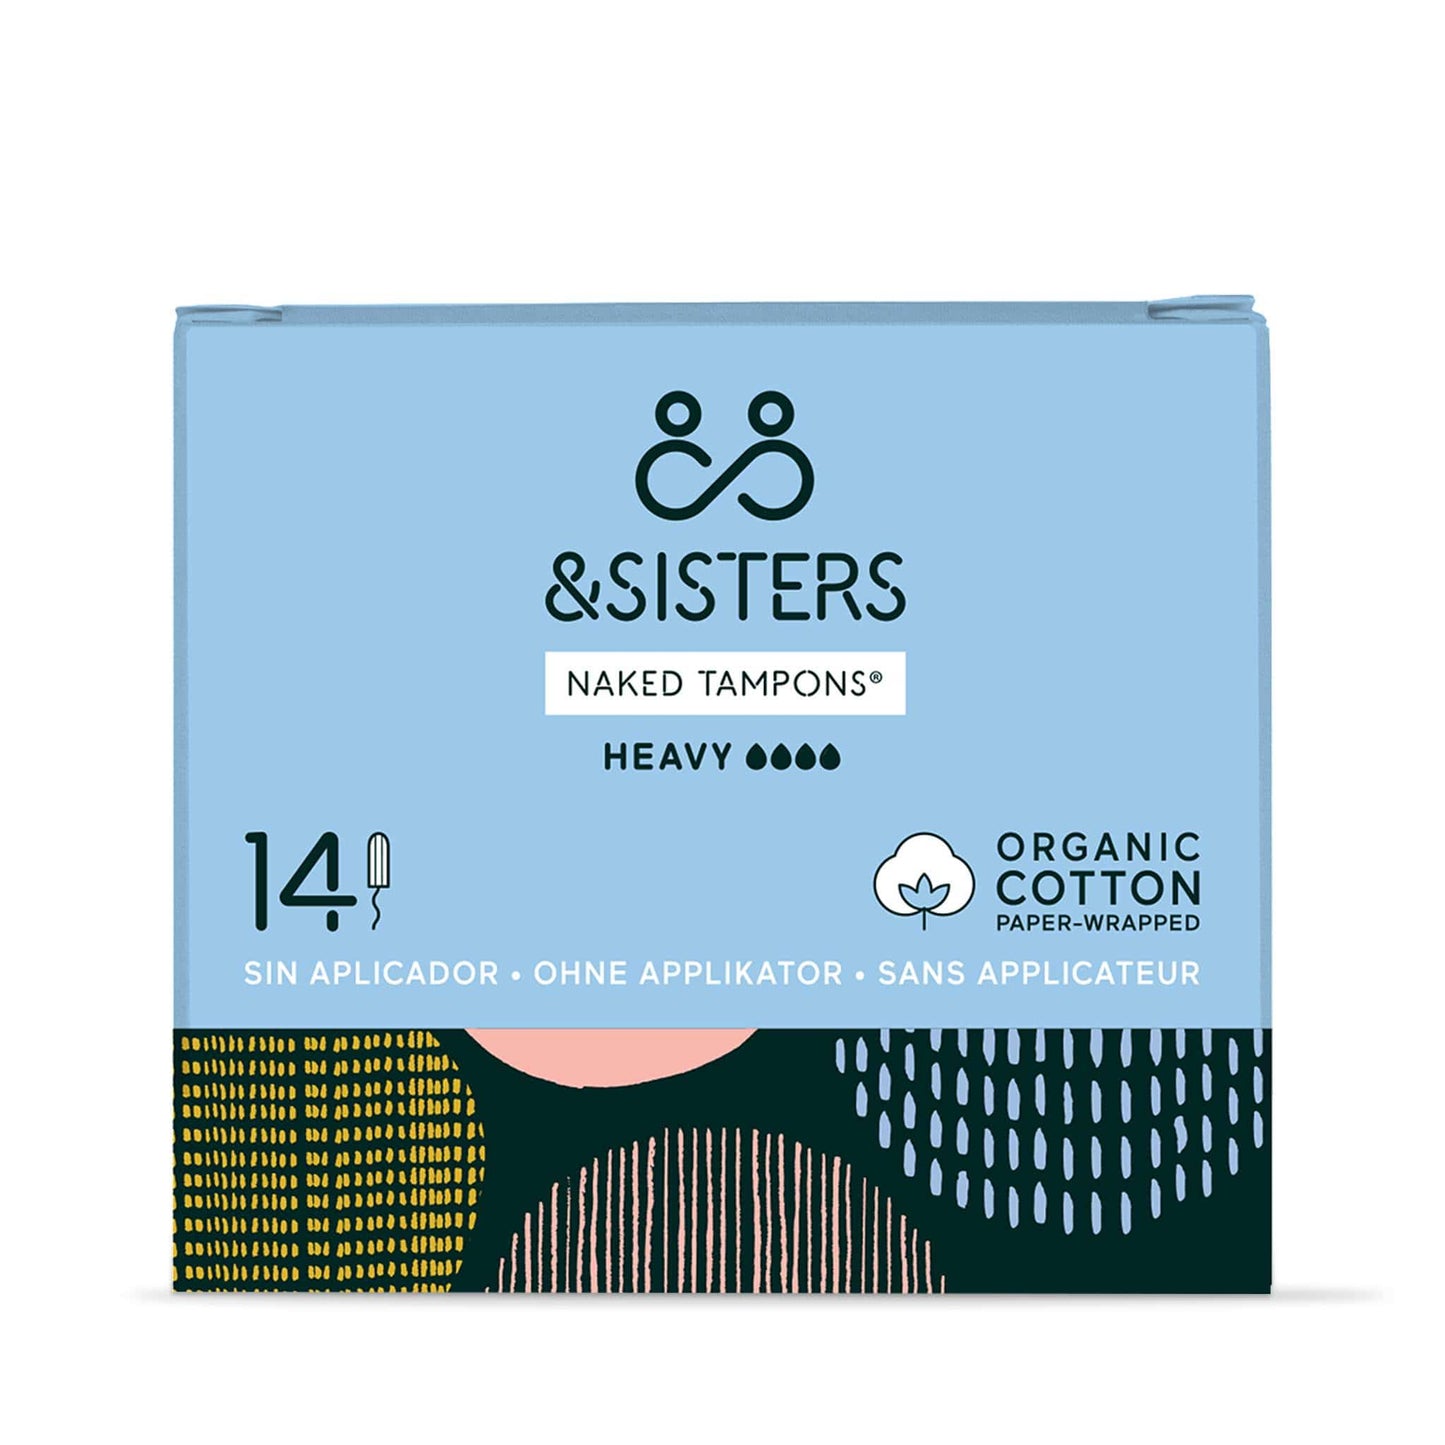 & SISTERS Tampons Heavy Naked Tampons - Plastic-Free and Organic Cotton - & SISTERS